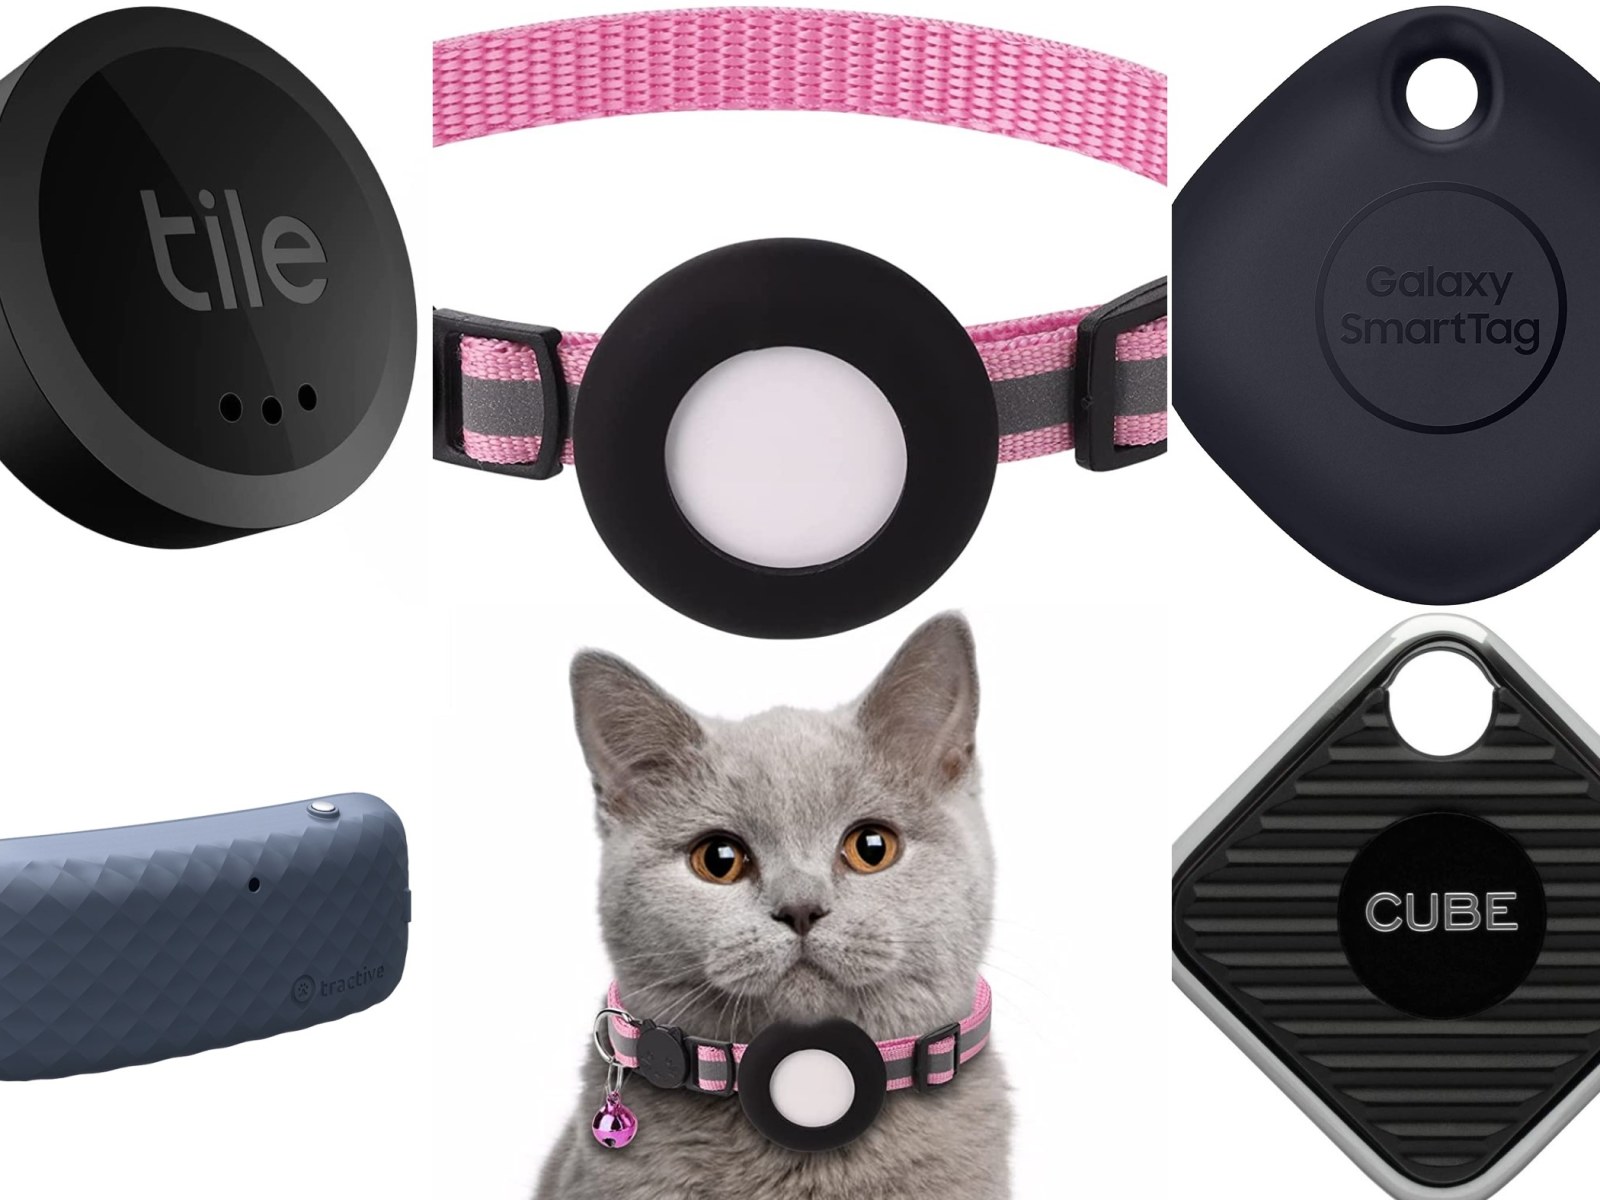 Tractive GPS Cat GPS Tracker For Cats 